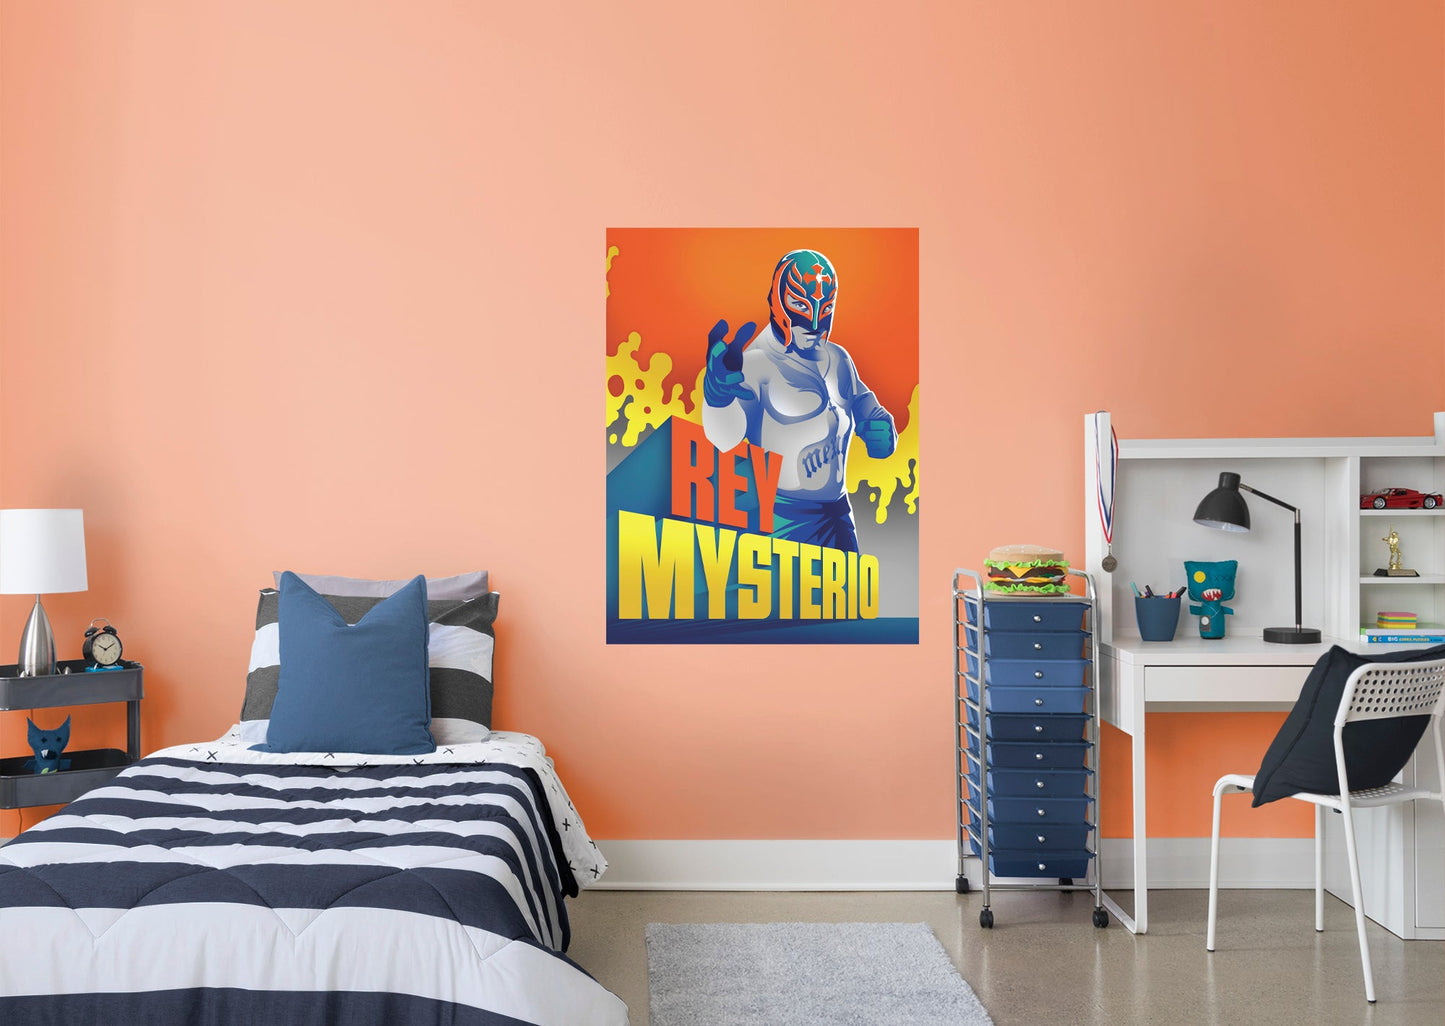 Rey Mysterio  Mural        - Officially Licensed WWE Removable Wall   Adhesive Decal